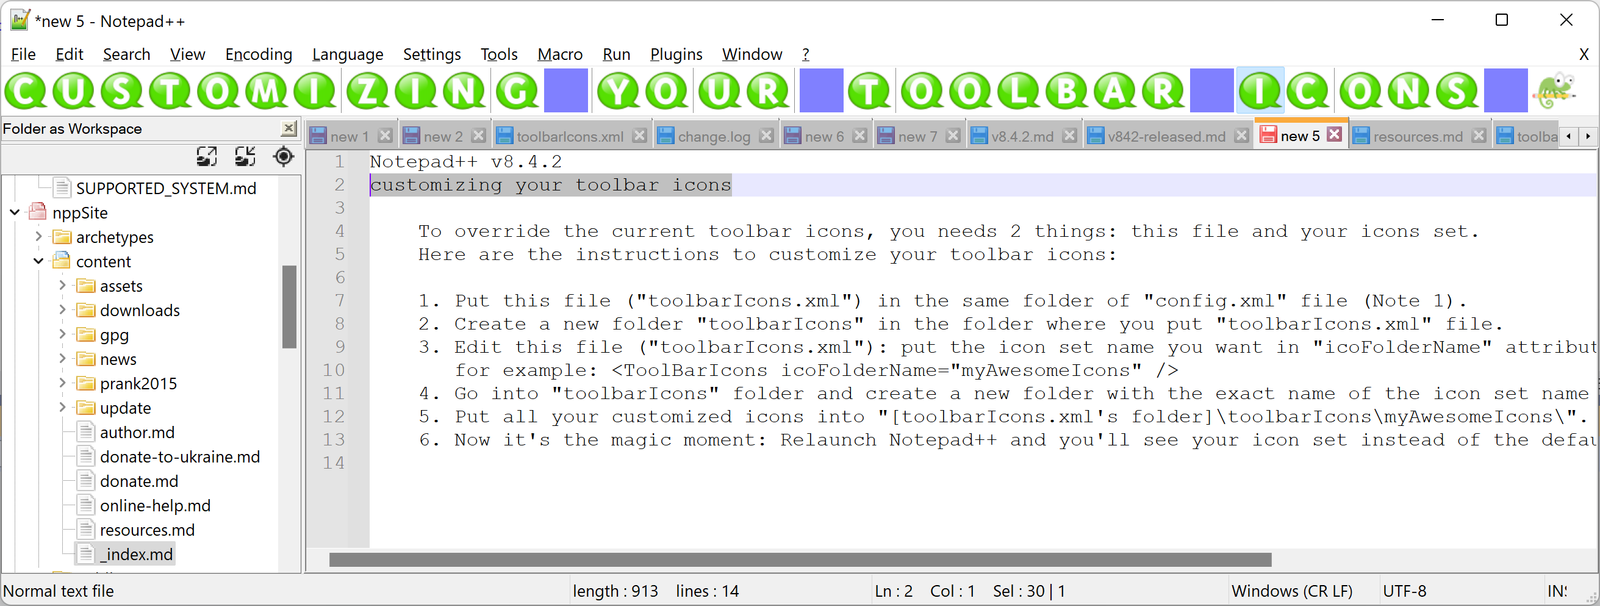 download the new version for ipod Notepad++ 8.5.8